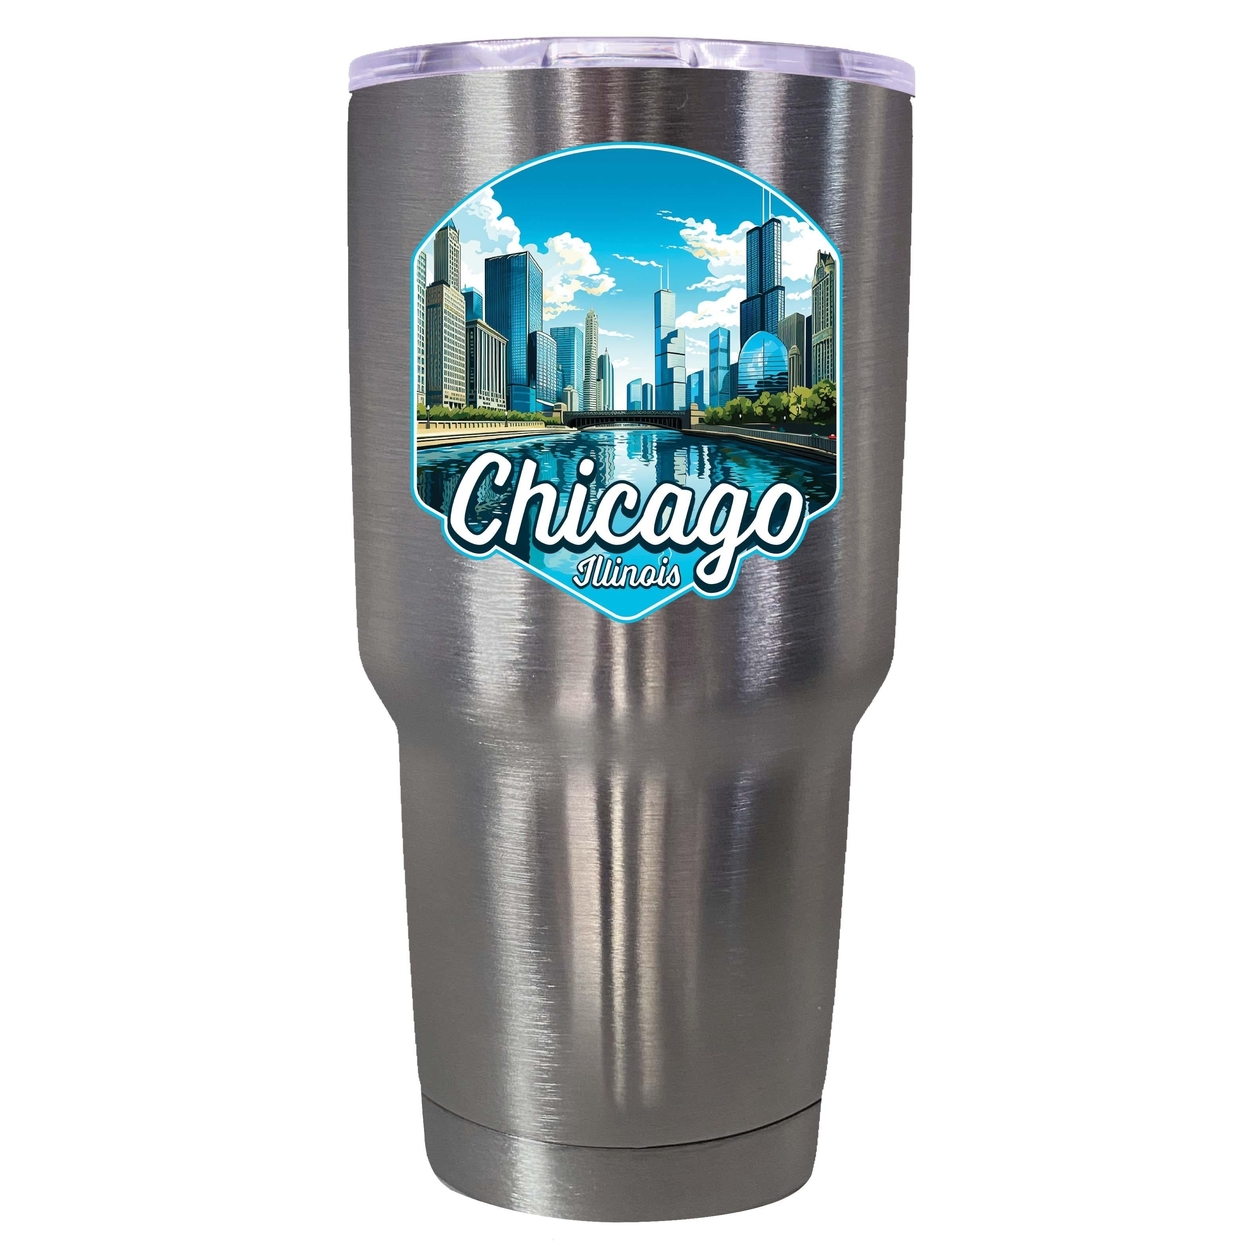 Chicago Illinois A Souvenir 24 Oz Insulated Tumbler - Stainless Steel,,4-Pack